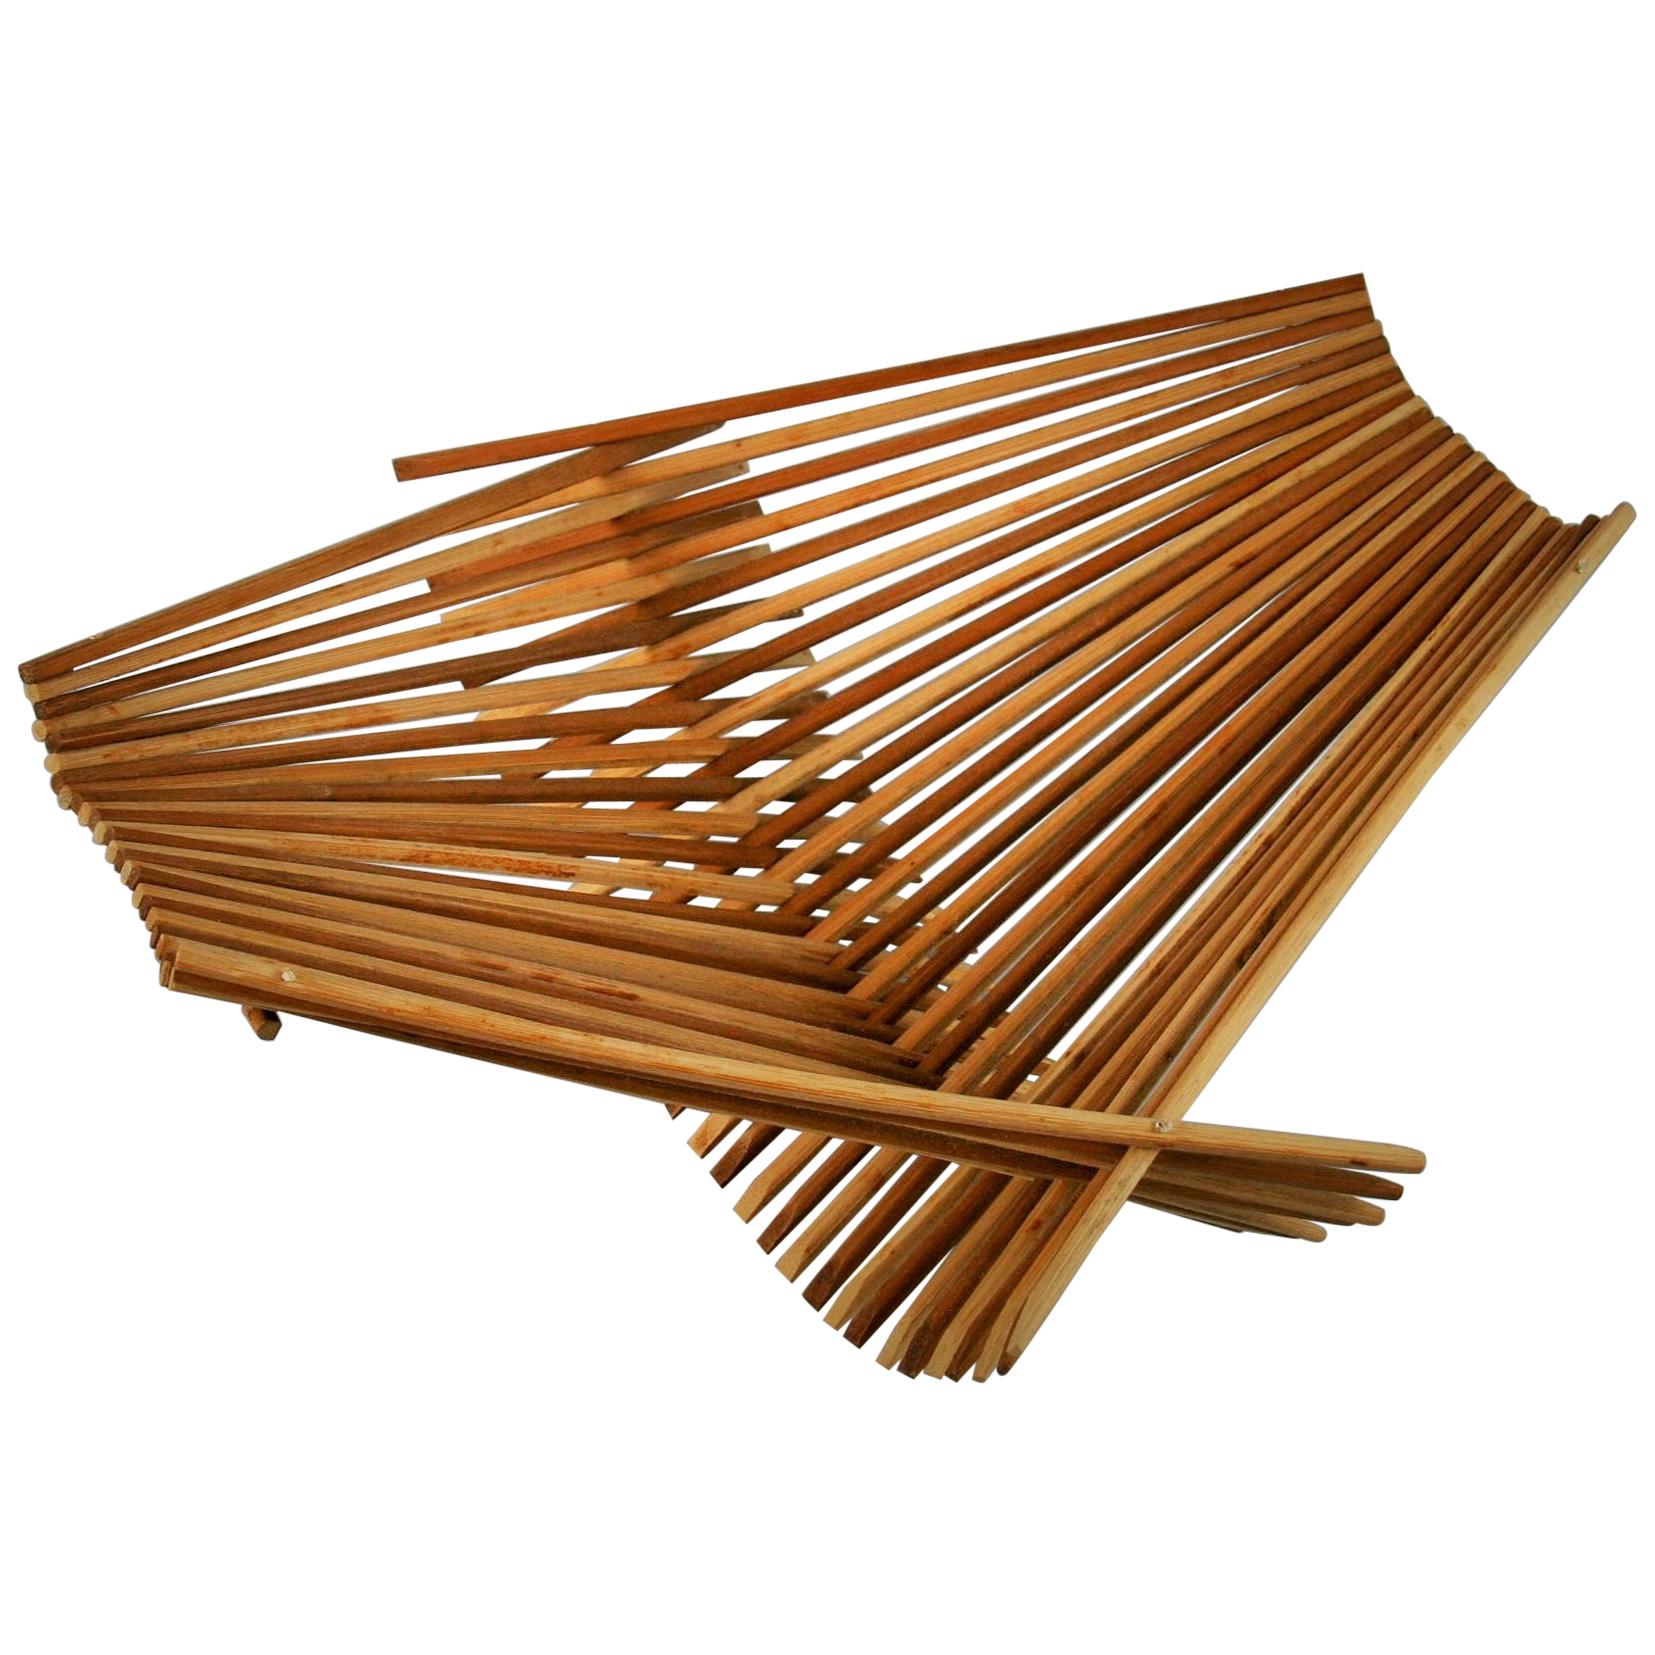 3-482 Japanese hand made stick basket using 2 different wood colors. Bread /fruit display